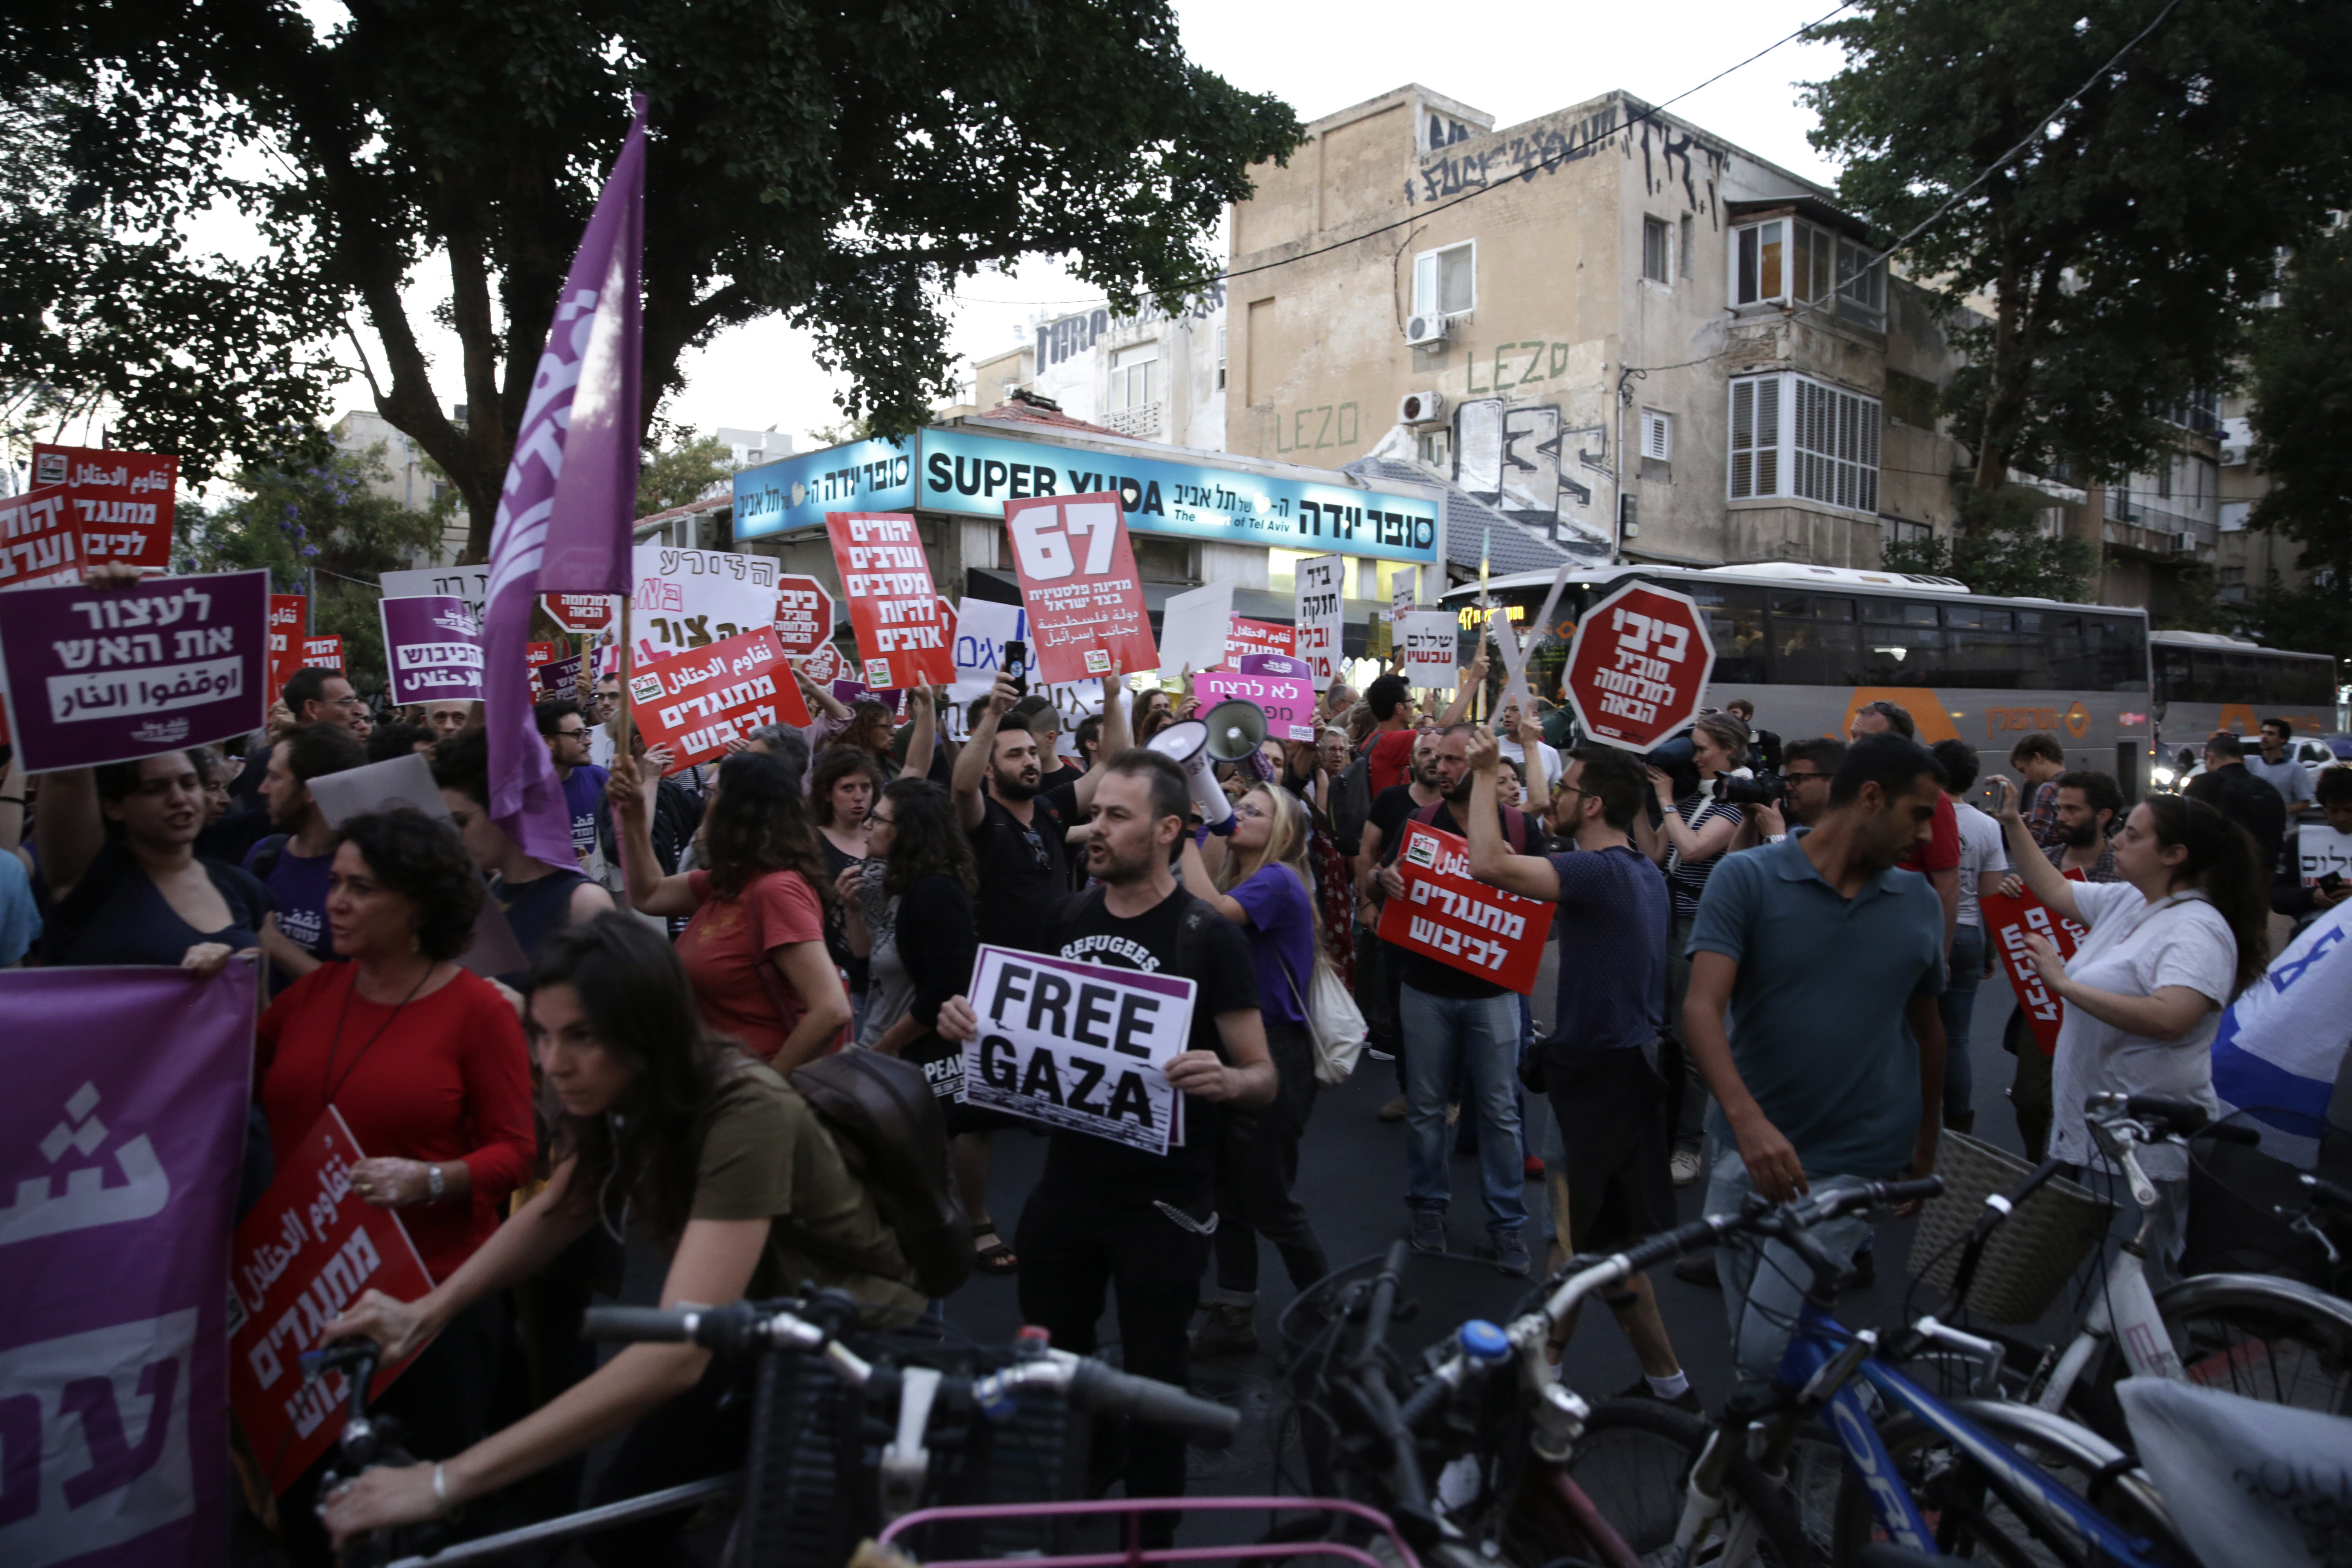 Left wing Israelis hold signs during a demonstration against the situation in Gaza in Tel Aviv, Israel, Tuesday, May 15, 2018. Israel faced a growing backlash Tuesday and new charges of using excessive force, a day after Israeli troops firing from across a border fence killed 59 Palestinians and wounded more than 2,700 at a mass protest in Gaza. (AP Photo/Sebastian Scheiner)